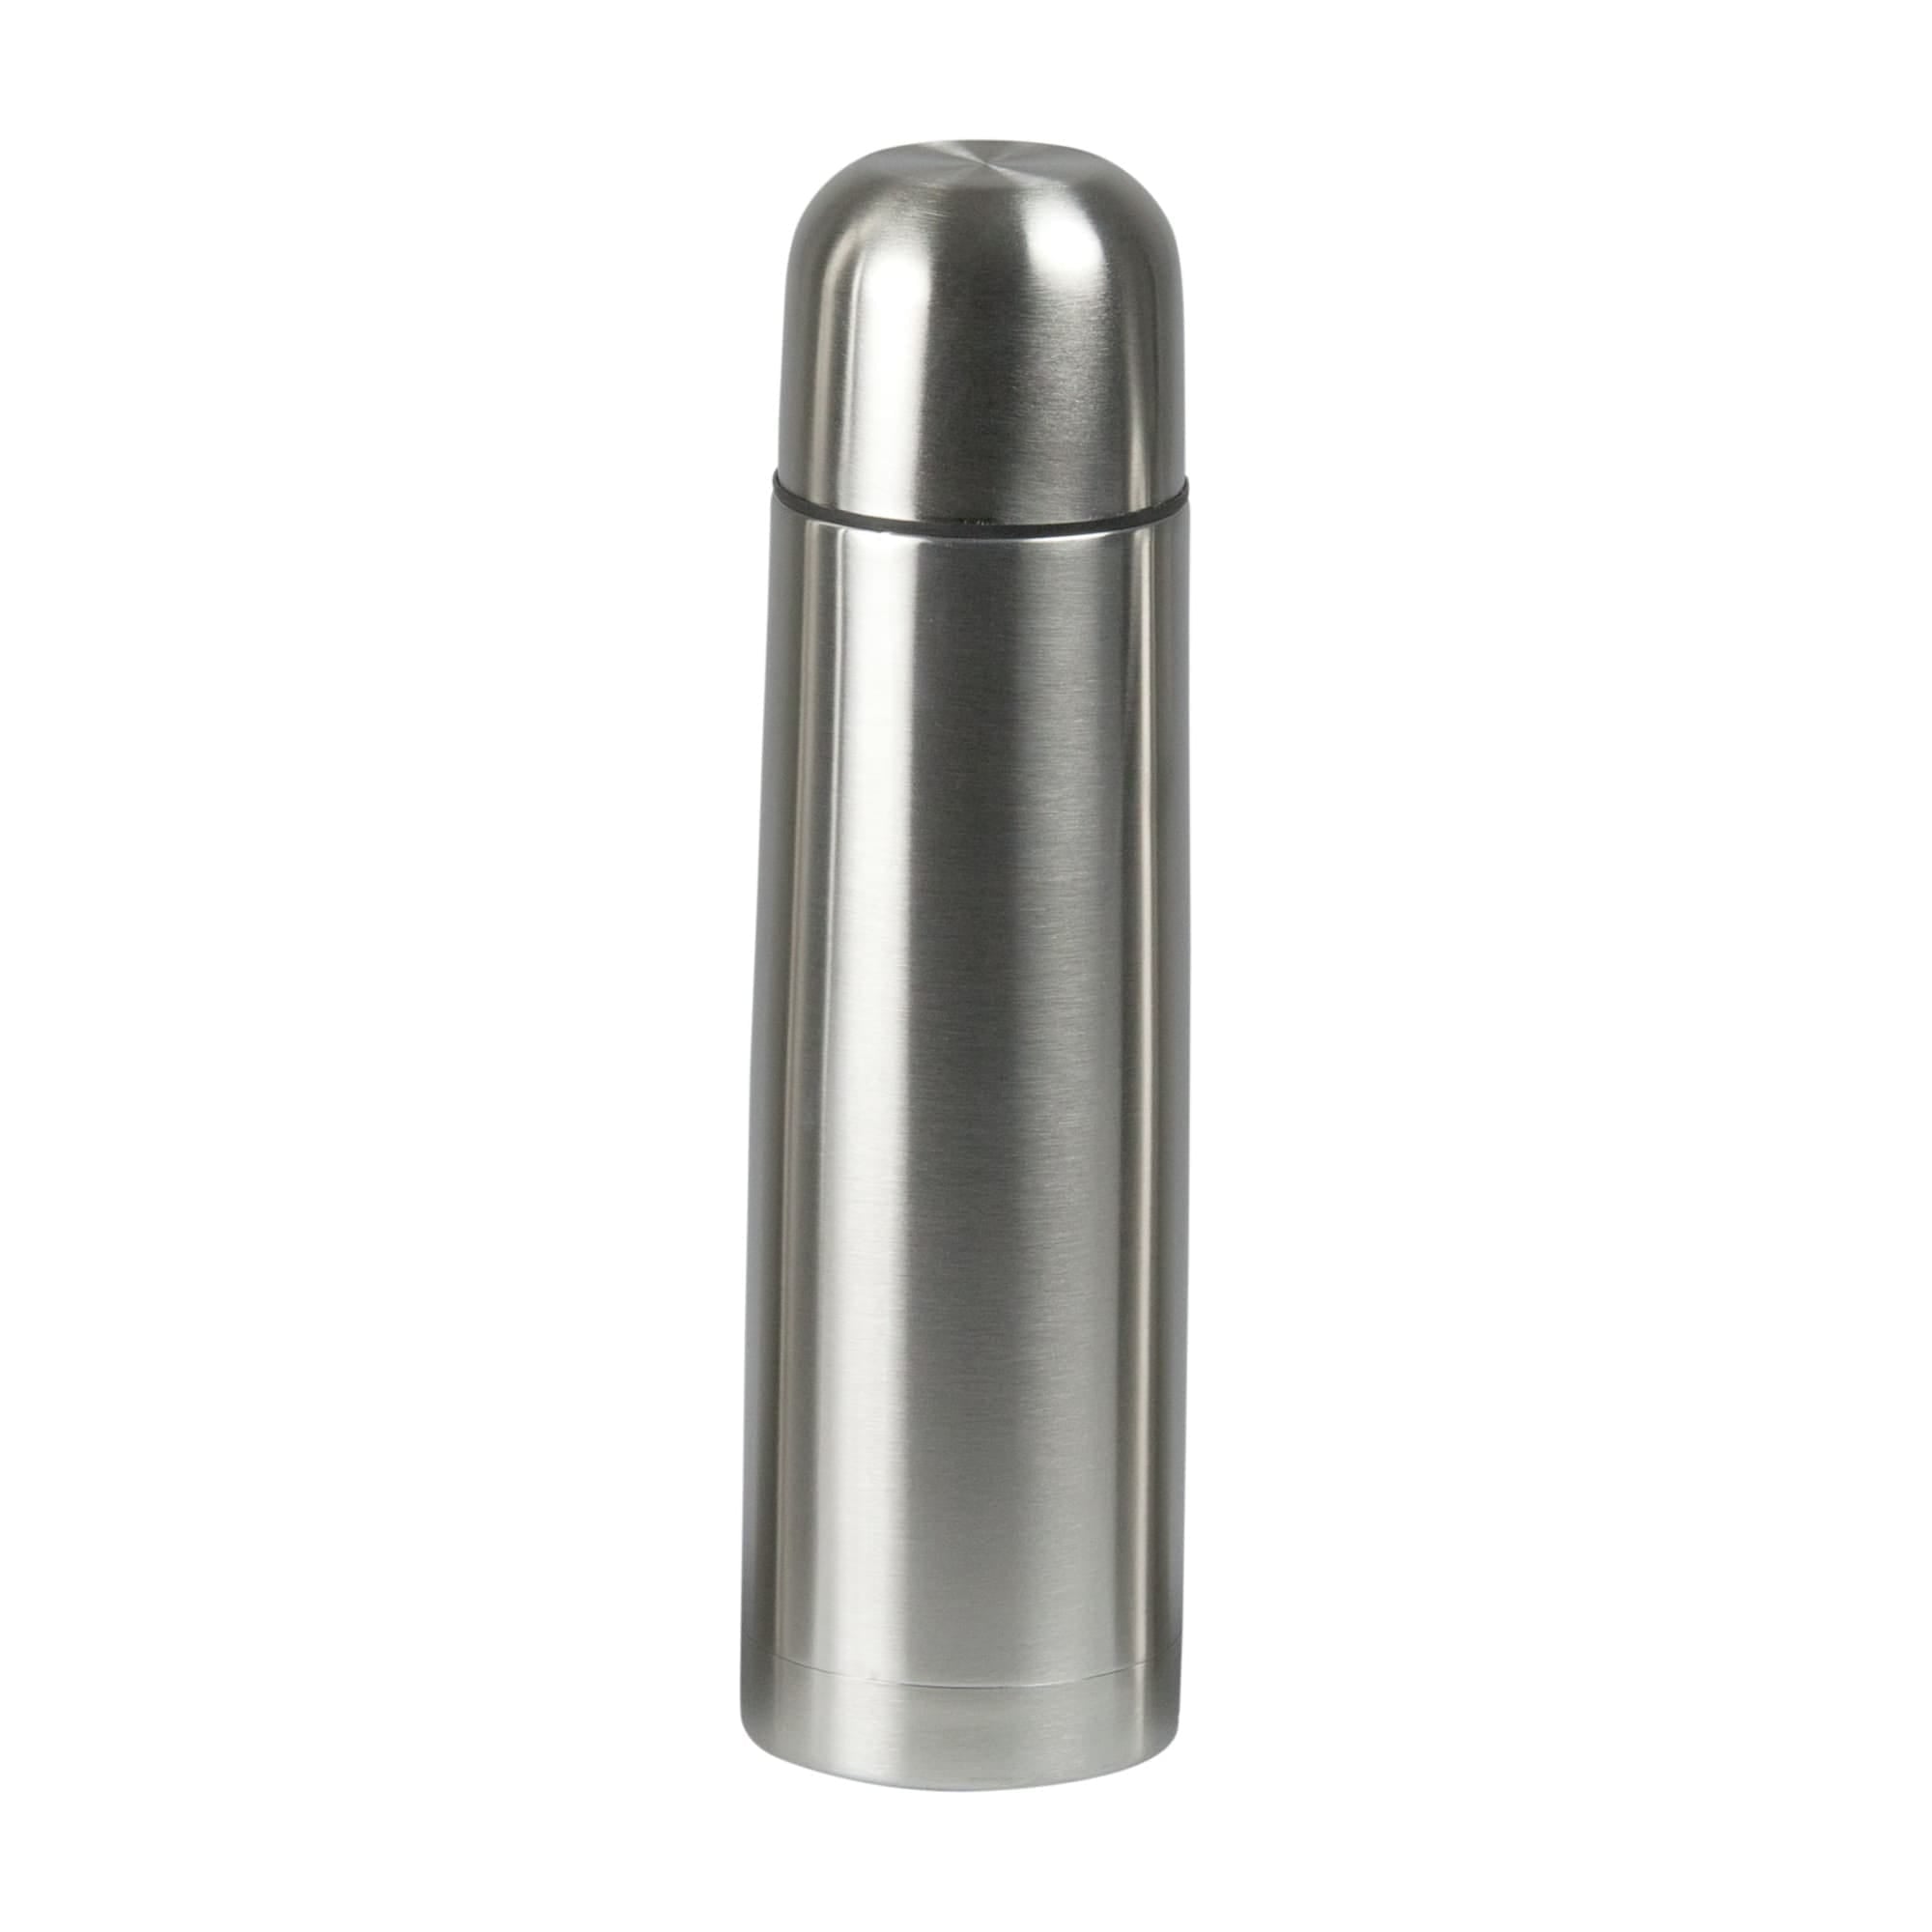 Home Basics 25.36 oz. Stainless Steel Bullet Vaccum Flask, Silver $6 EACH, CASE PACK OF 12